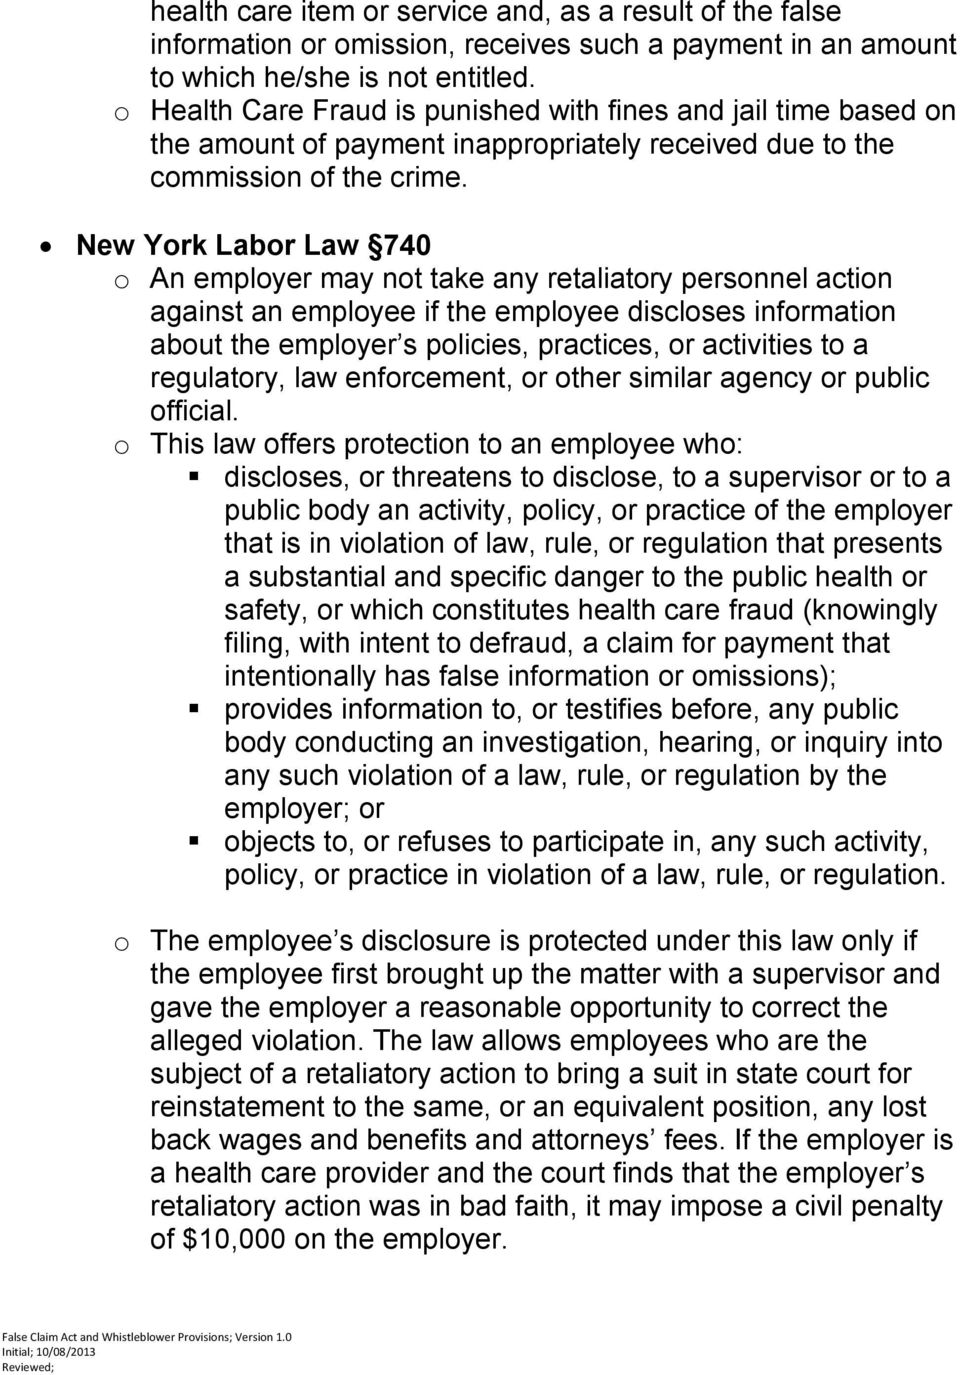 New York Labor Law 740 o An employer may not take any retaliatory personnel action against an employee if the employee discloses information about the employer s policies, practices, or activities to